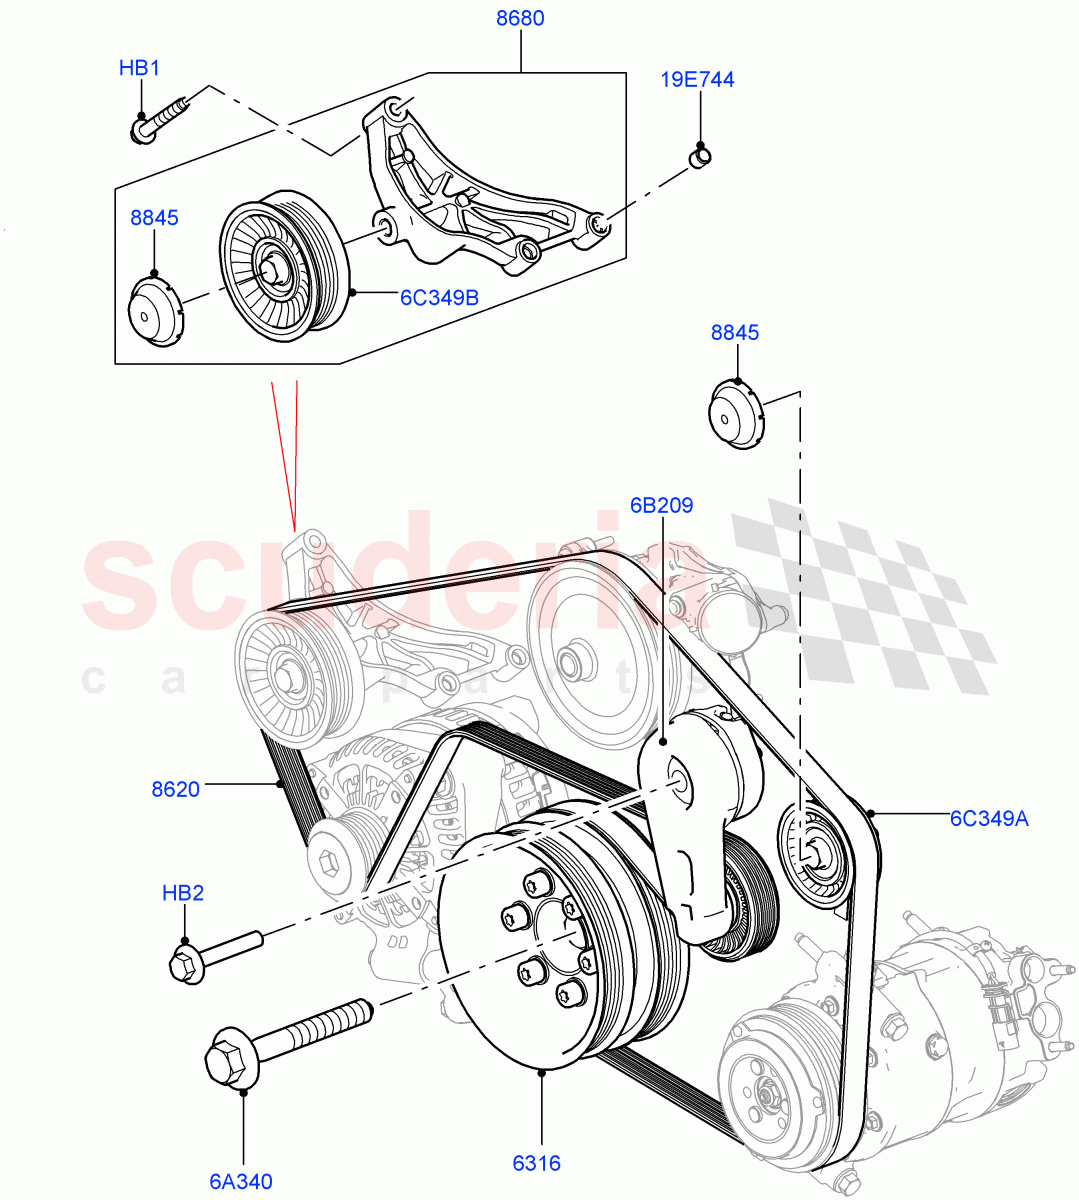 Pulleys And Drive Belts(Primary Drive, Nitra Plant Build)(3.0L DOHC GDI SC V6 PETROL)((V)FROMK2000001) of Land Rover Land Rover Discovery 5 (2017+) [3.0 DOHC GDI SC V6 Petrol]